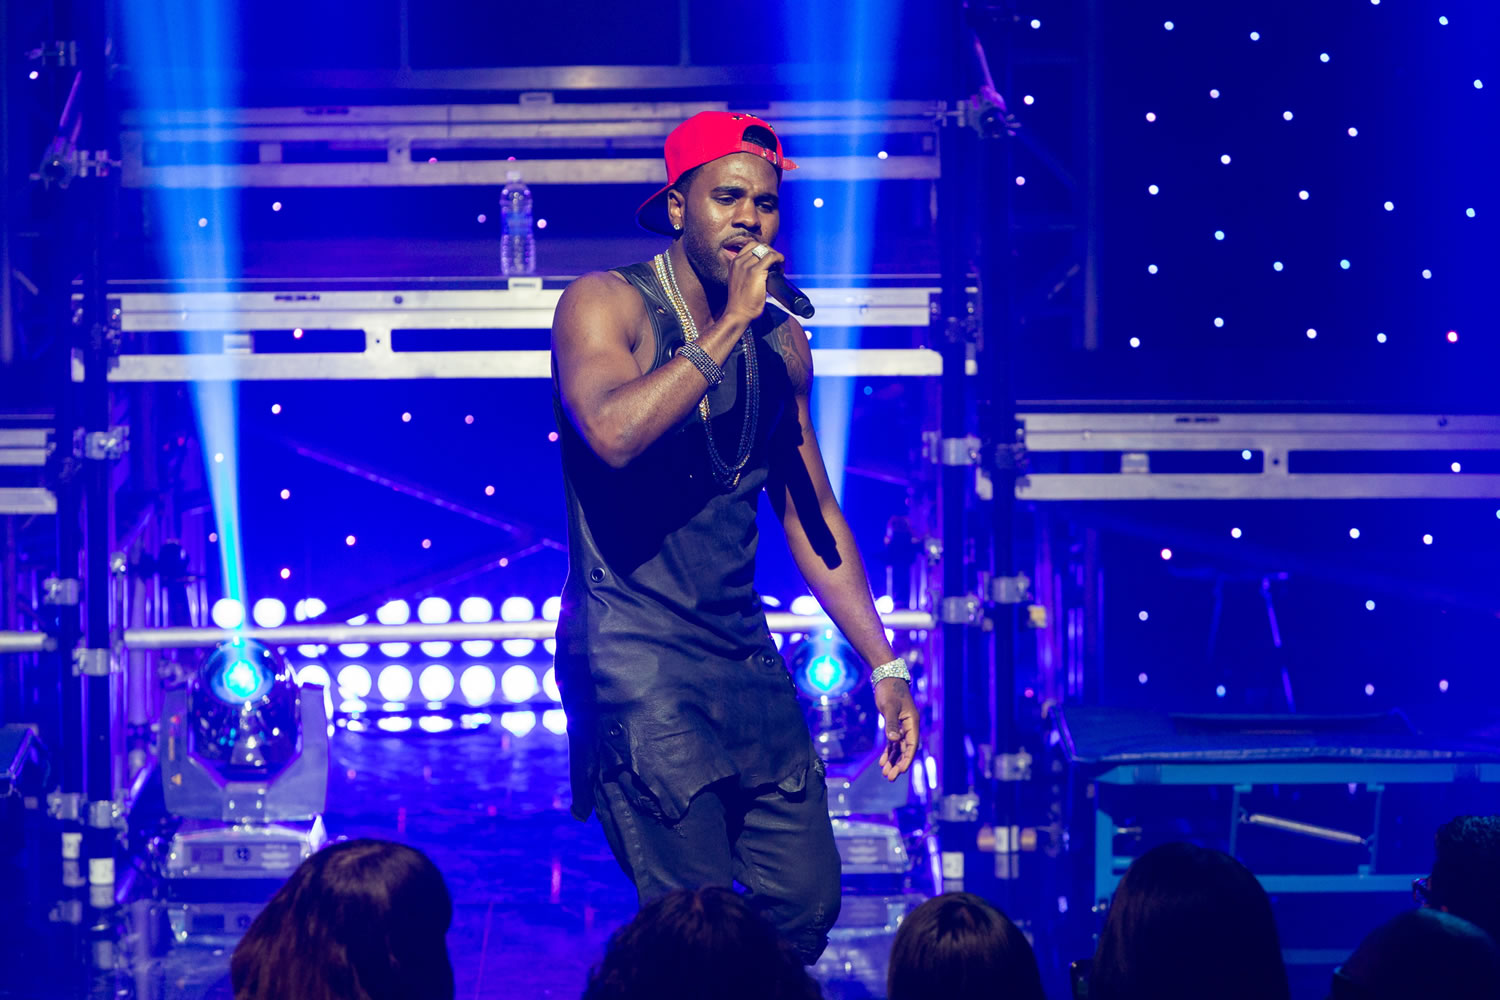 Jason Derulo performs at an exclusive album release party for &quot;Talk Dirty&quot; as part of the iHeartRadio Live series presented by Clear Channel at the iHeartRadio Theater, in Burbank, Calif.